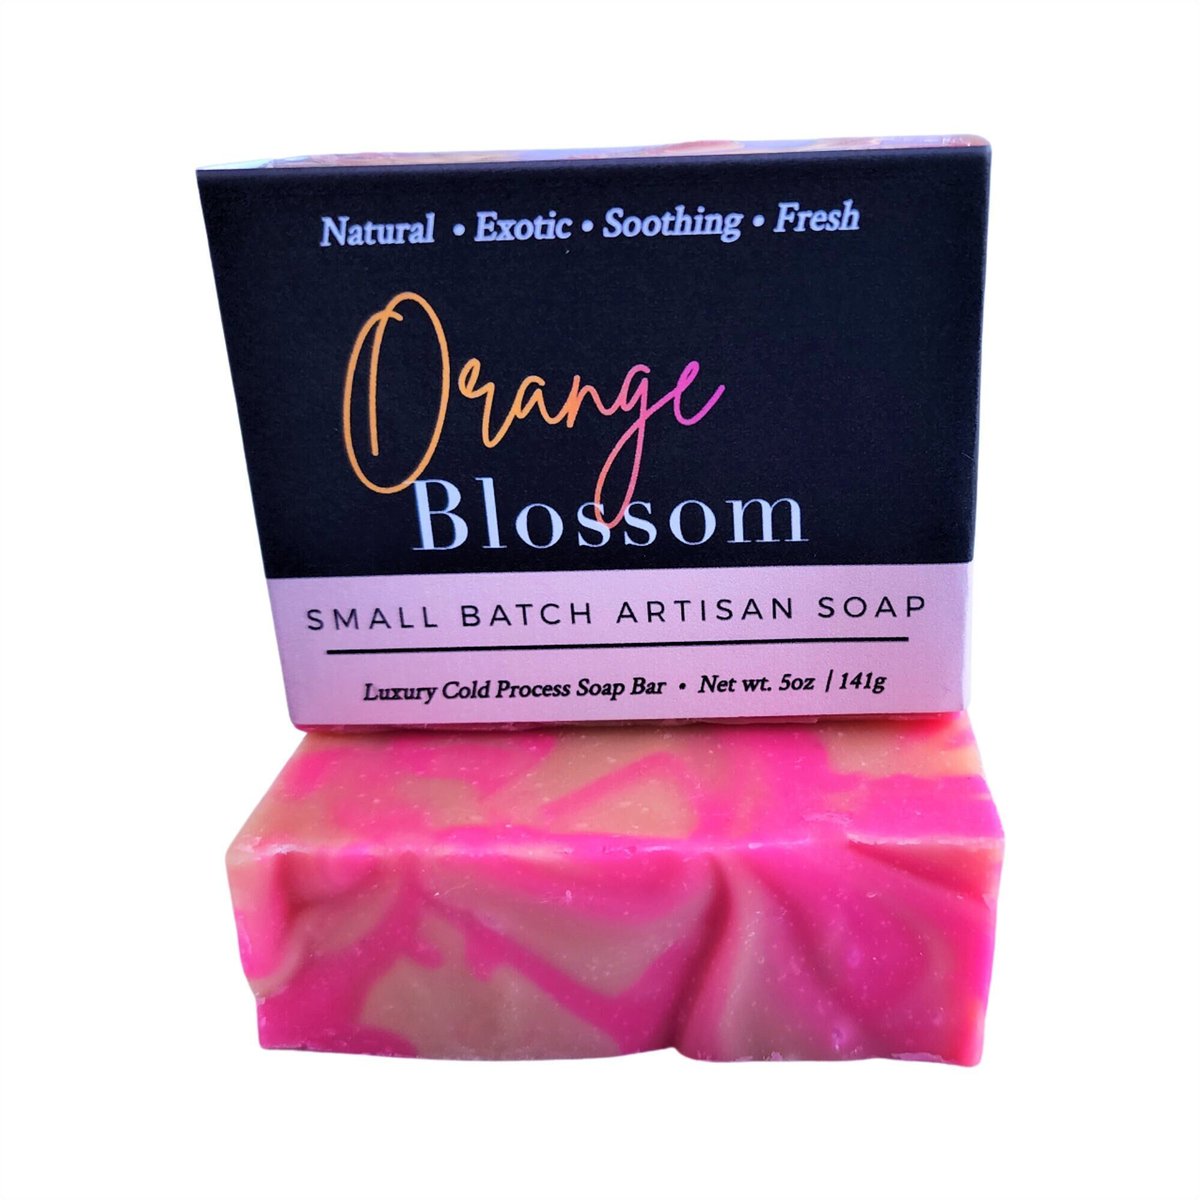 Orange Blossom Soap, Neroli Soap, Natural Soap, Vegan Soap, Cold Process Soap, Soap Gift, , Best Seller, Body Soap, Soap Bar, Birthday Gift tuppu.net/b7d787a6 #Soapgift #selfcare #gifts #handmadesoap #Christmasgifts #DeShawnMarie #shopsmall #DeshawnMarie